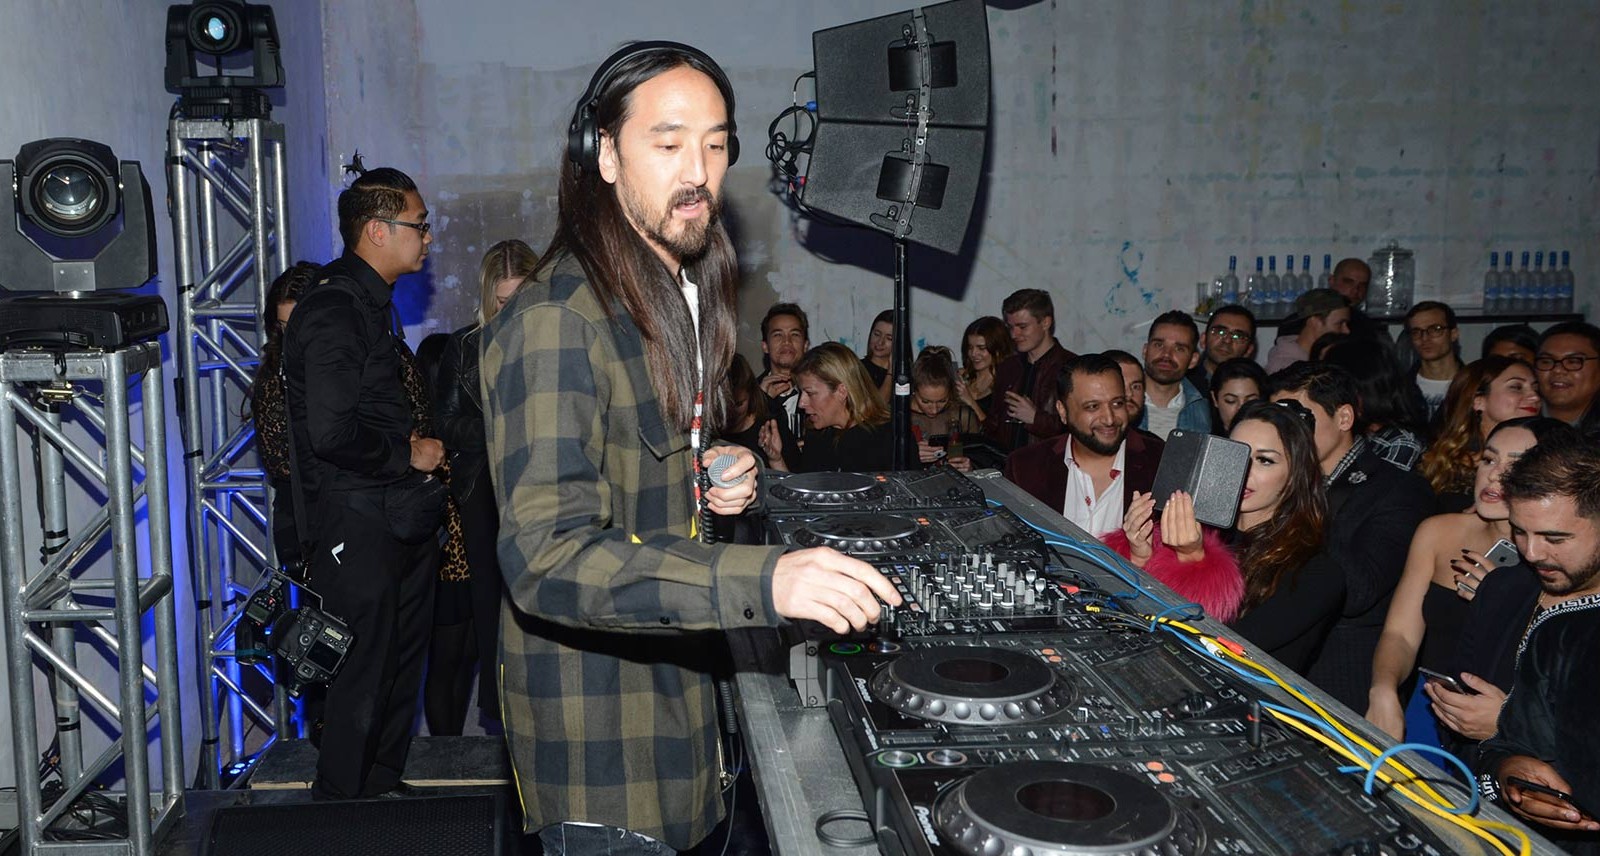 Steve Aoki: "I Think It’s Really Punk to Have Your Own Fashion Line"